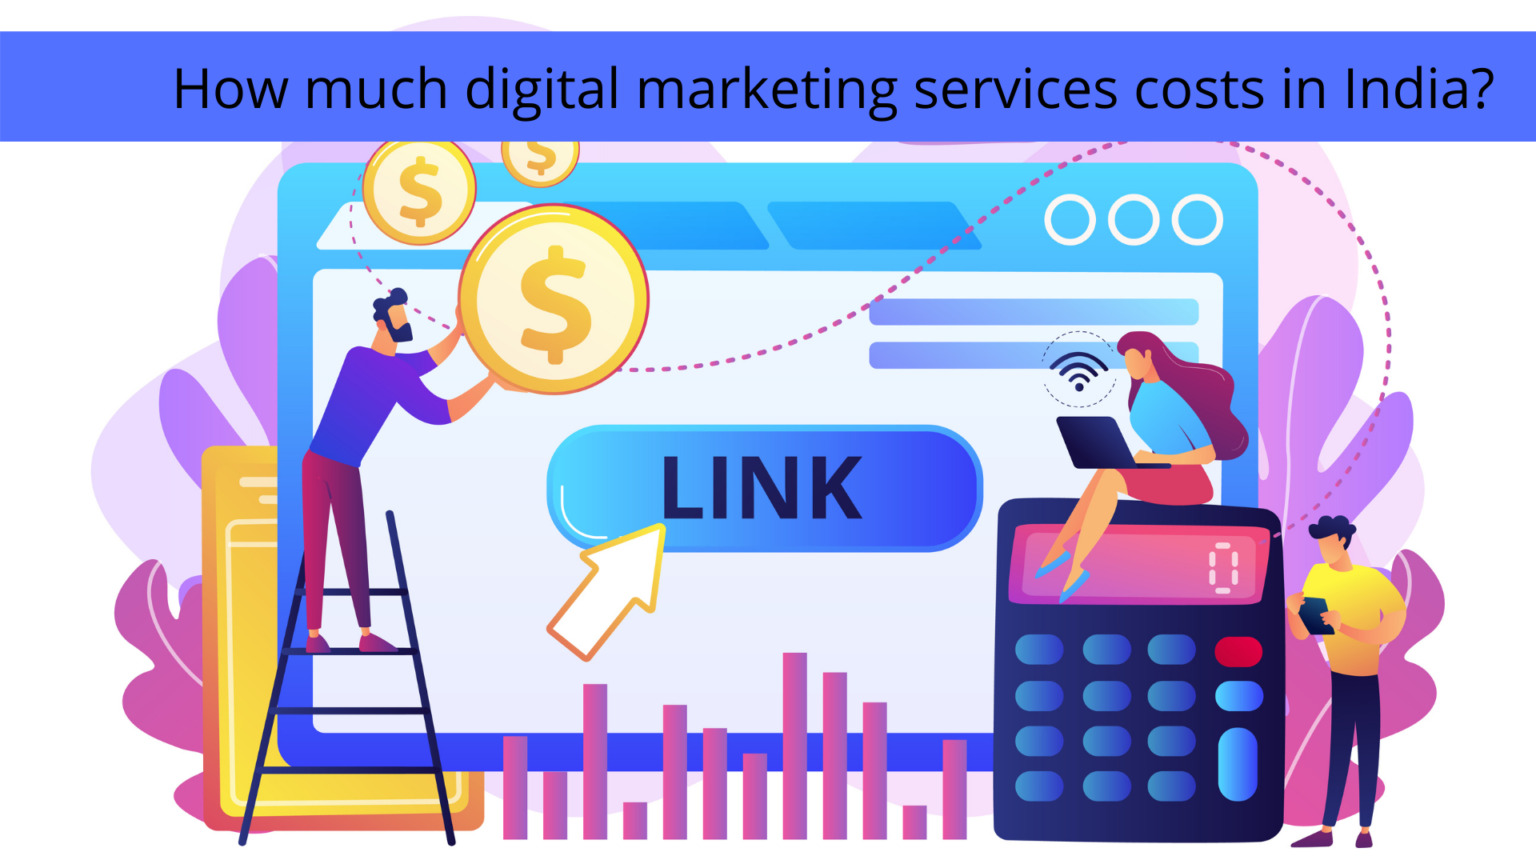 How much digital marketing services costs in India?